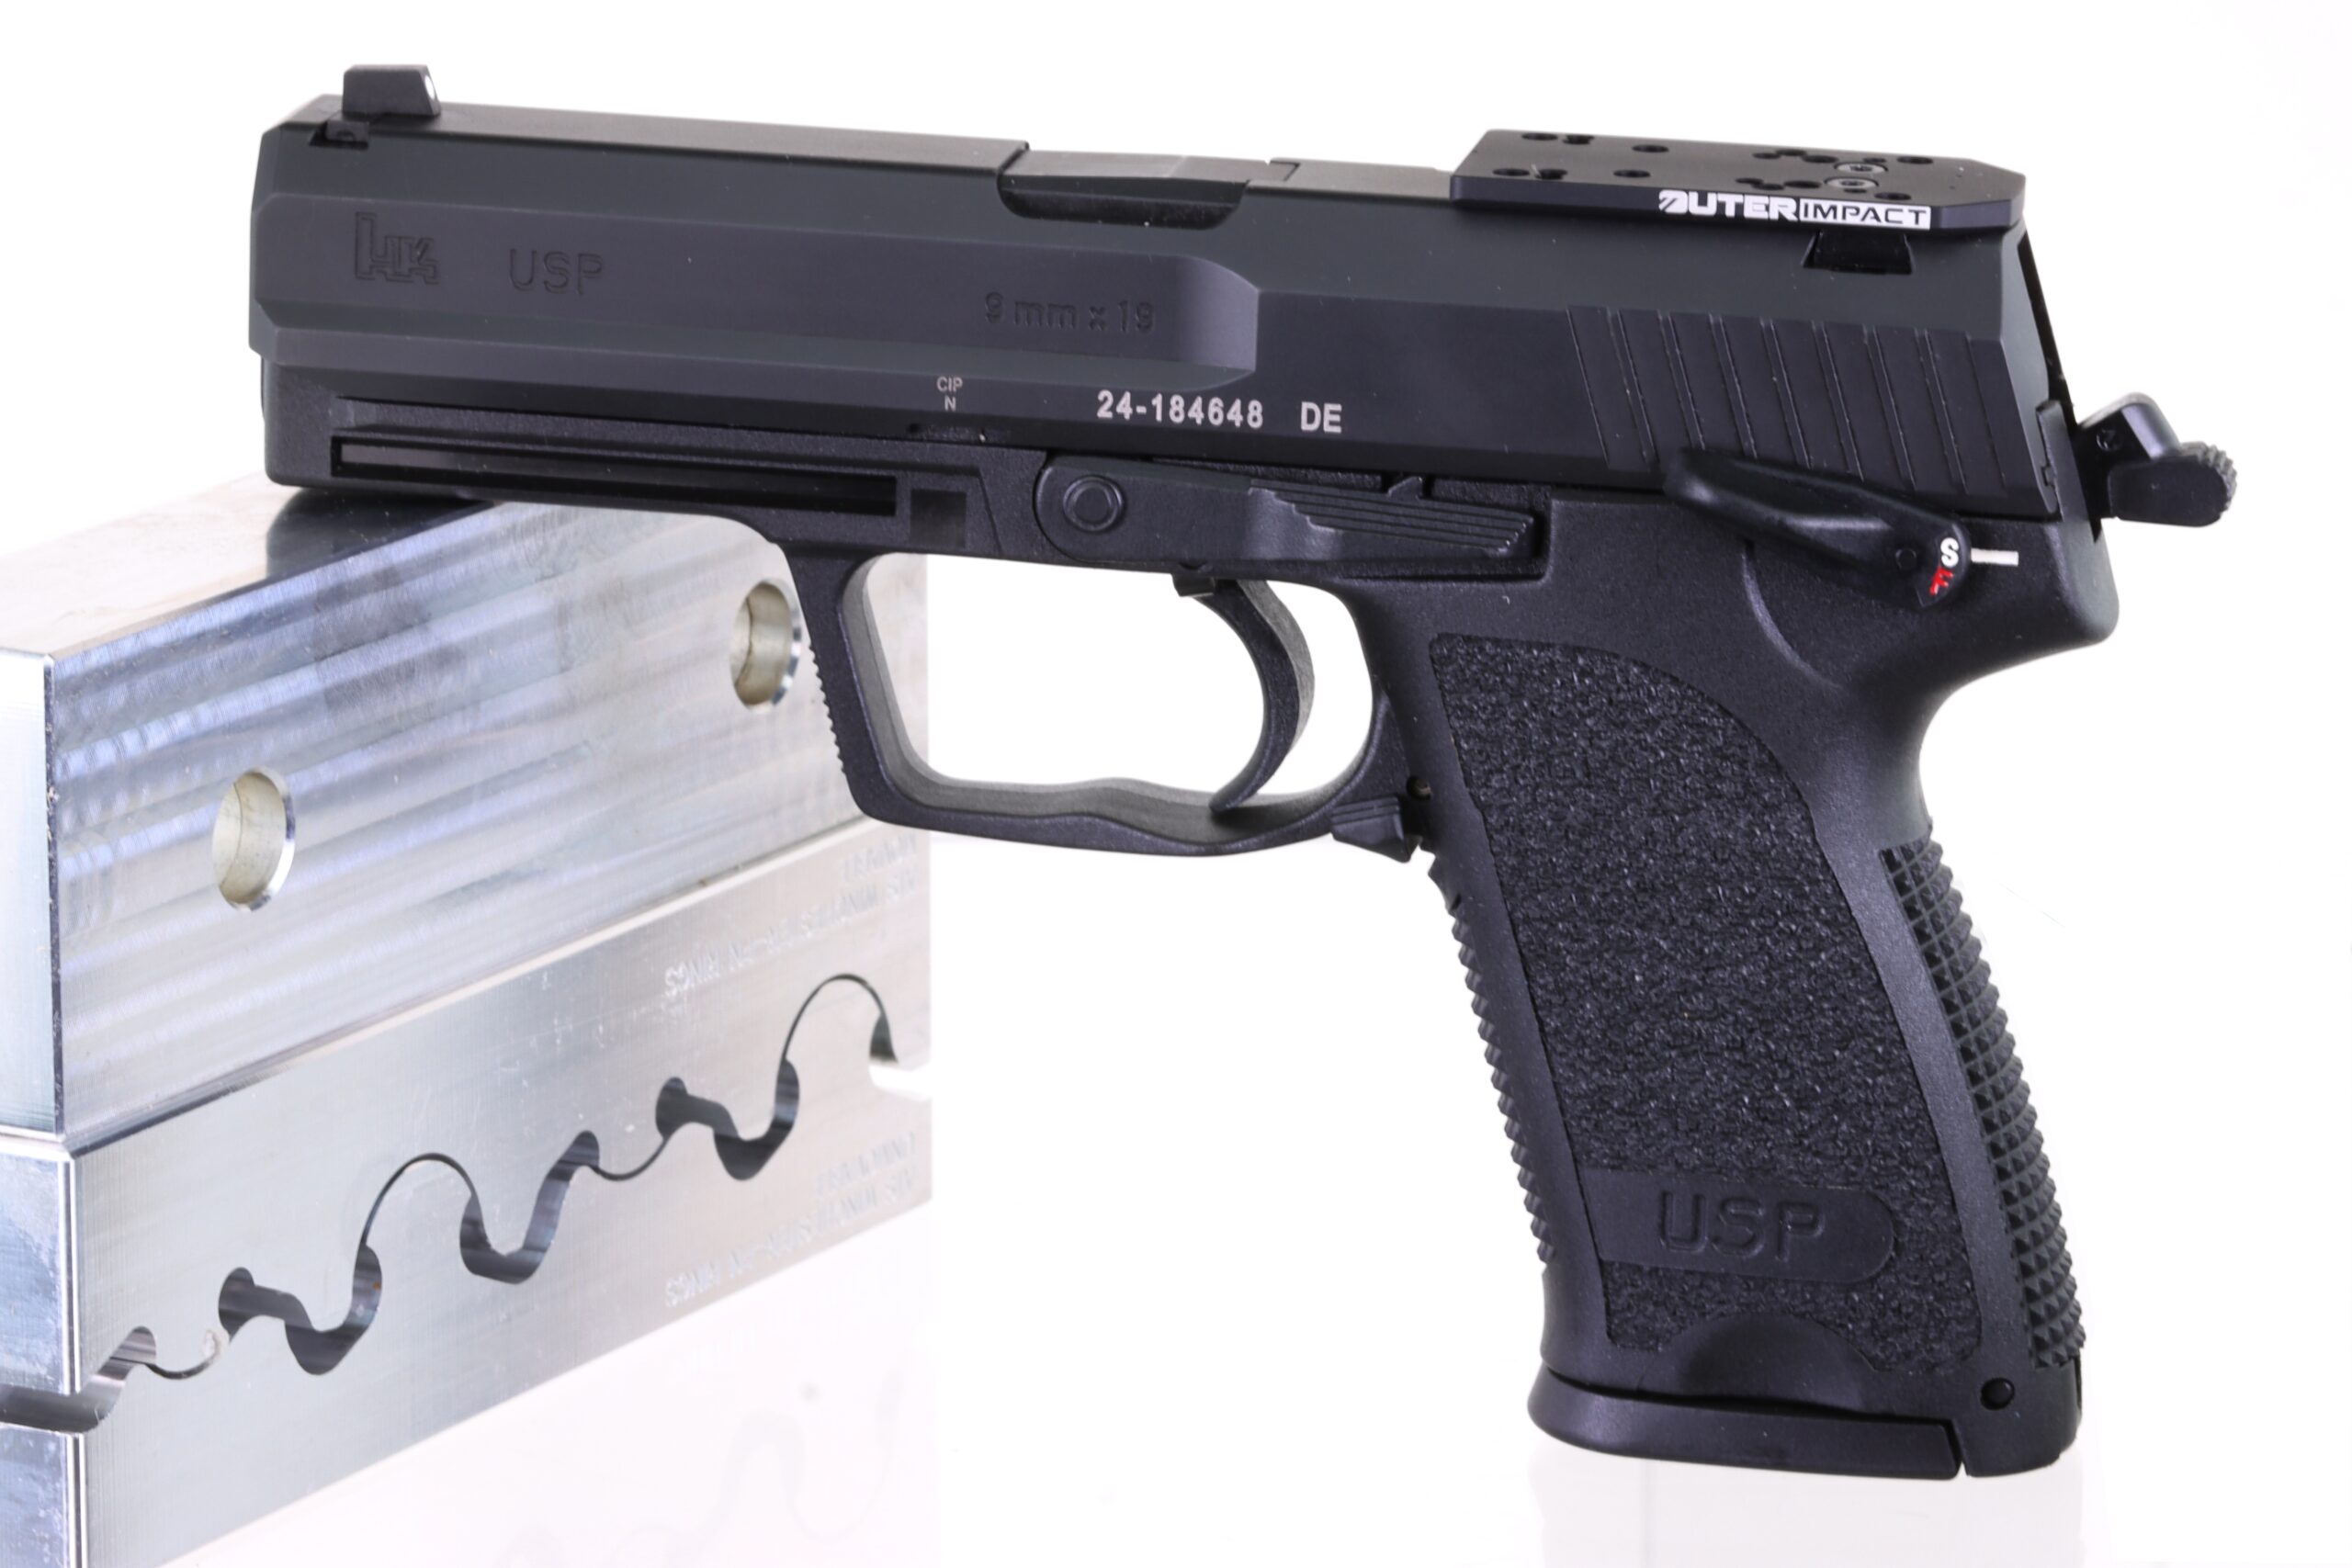 Red Dot Mount – MRA for H&K USP Pistol - Outer Impact Firearms & Motorsports